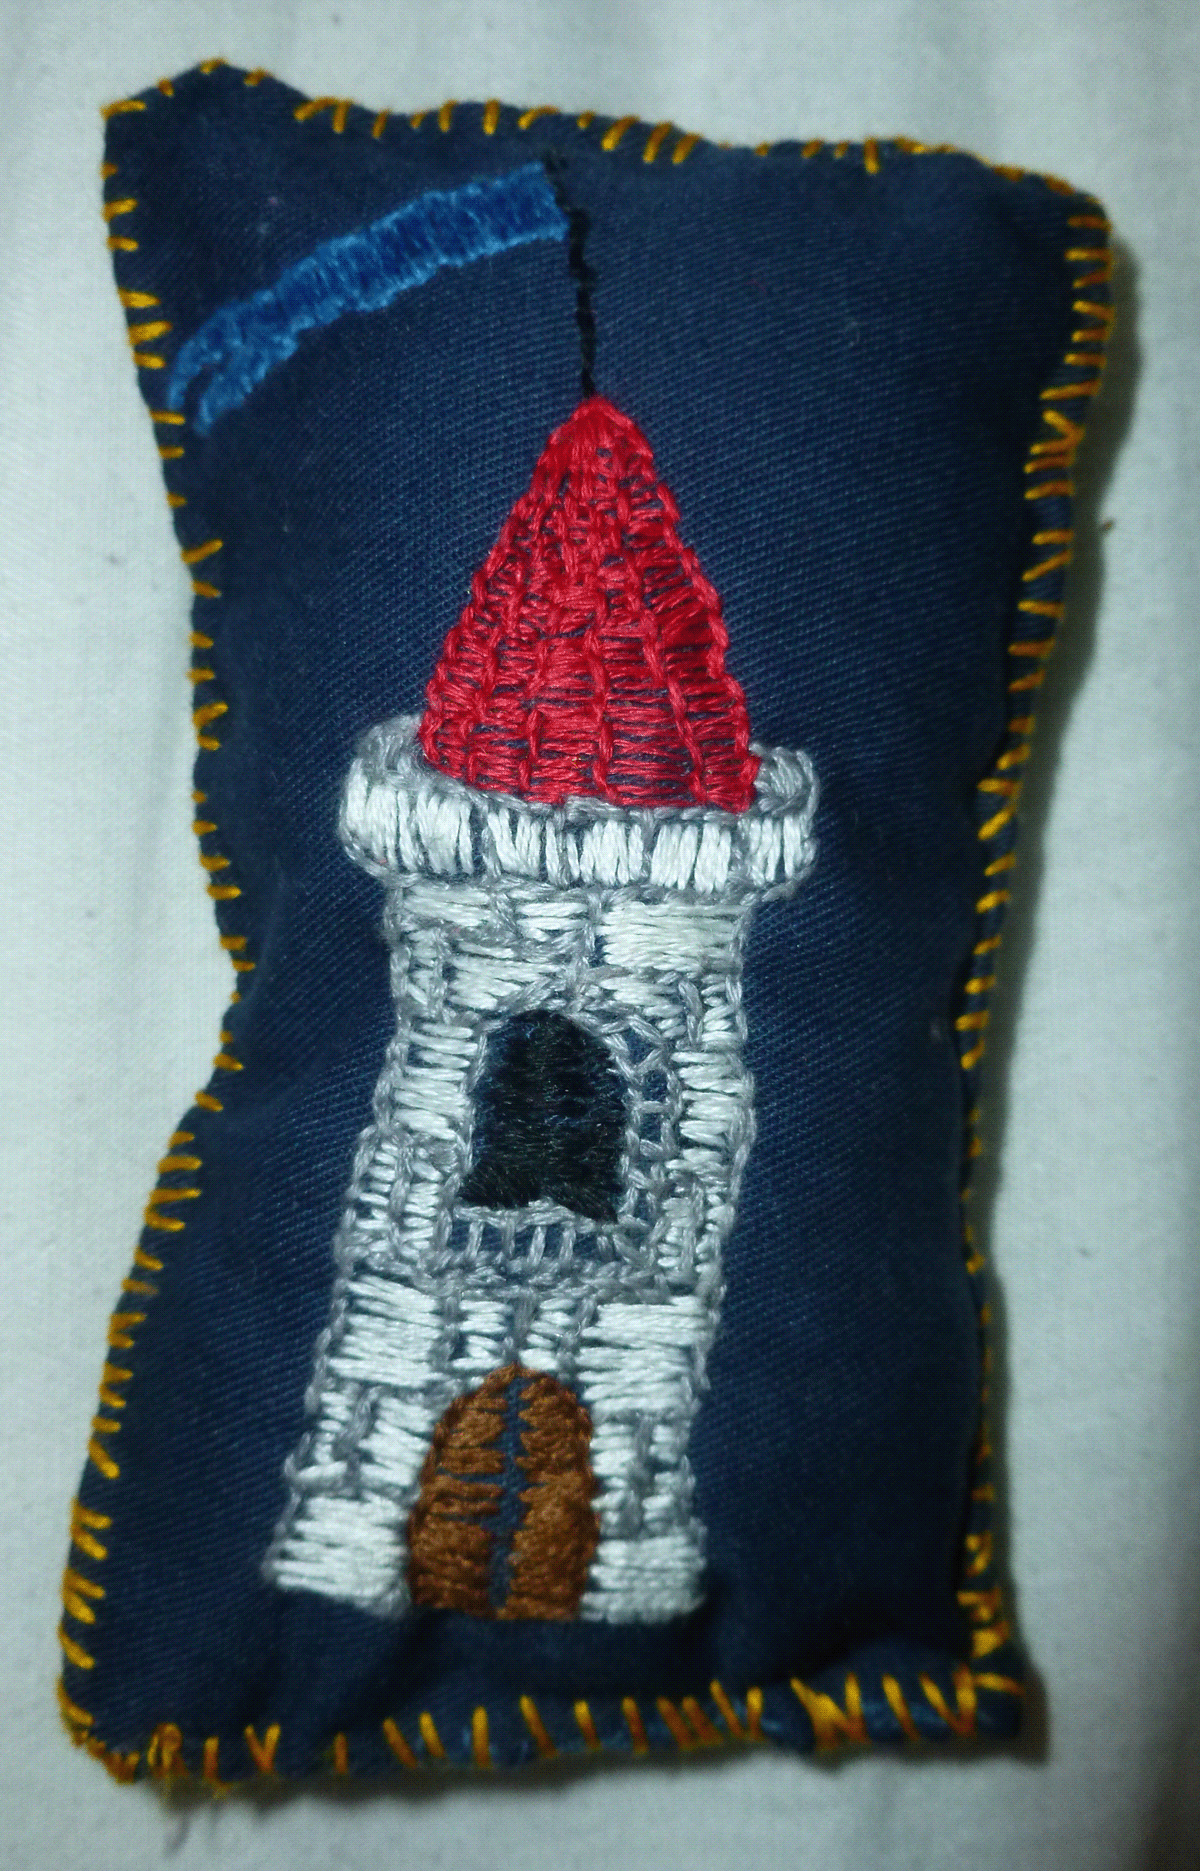 Castle pincushion Embroidery sewing